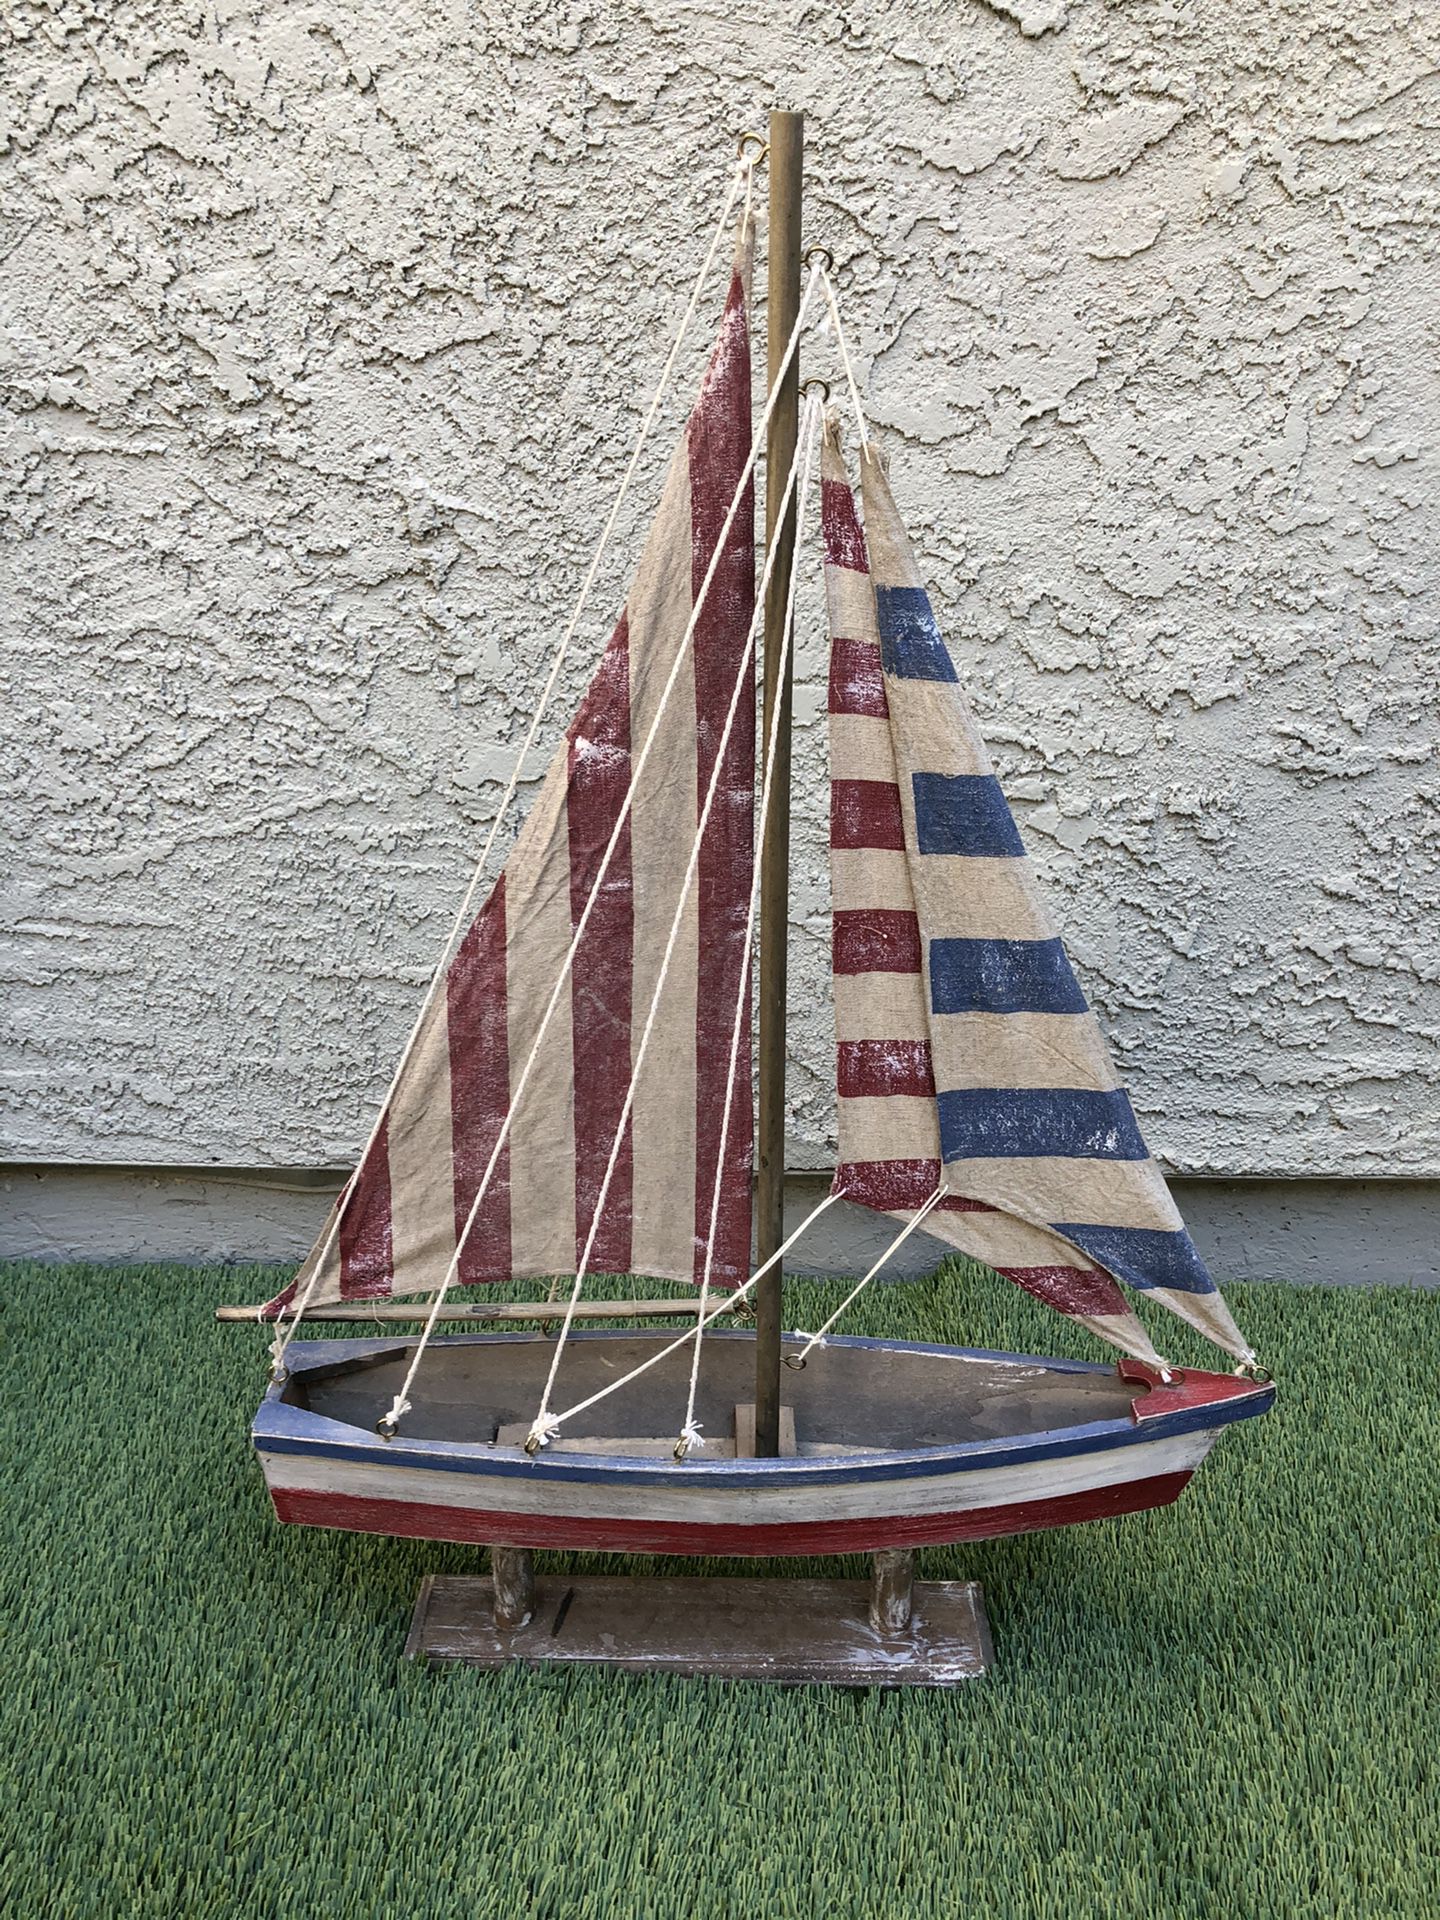 Sailboat USA red white and blue